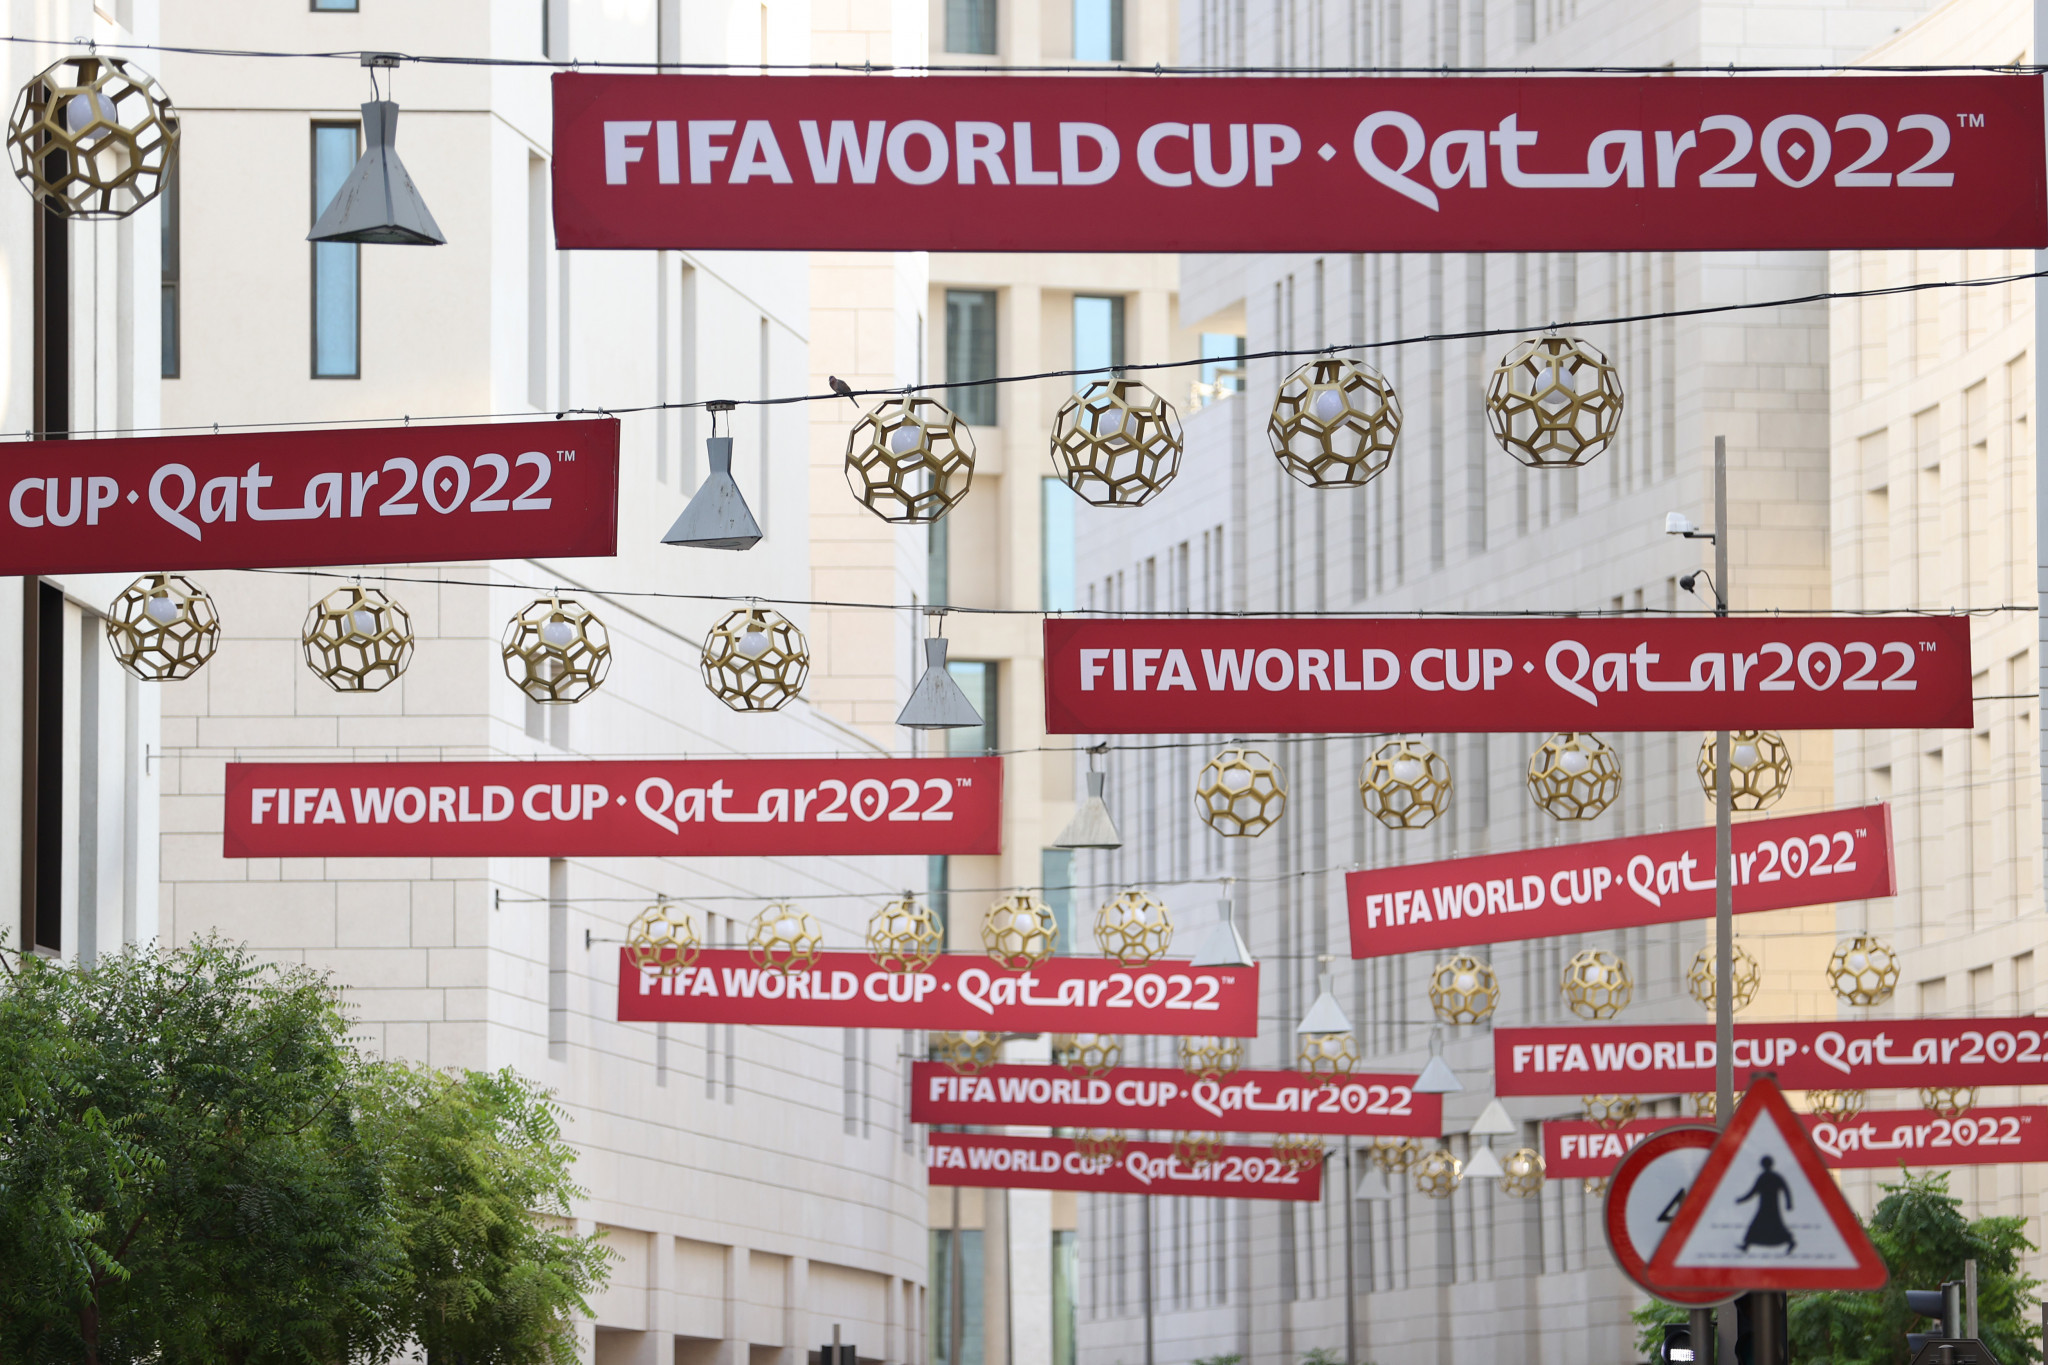 Qatar Supreme Committee apologises to television crew after interrupting broadcast in build-up to FIFA World Cup